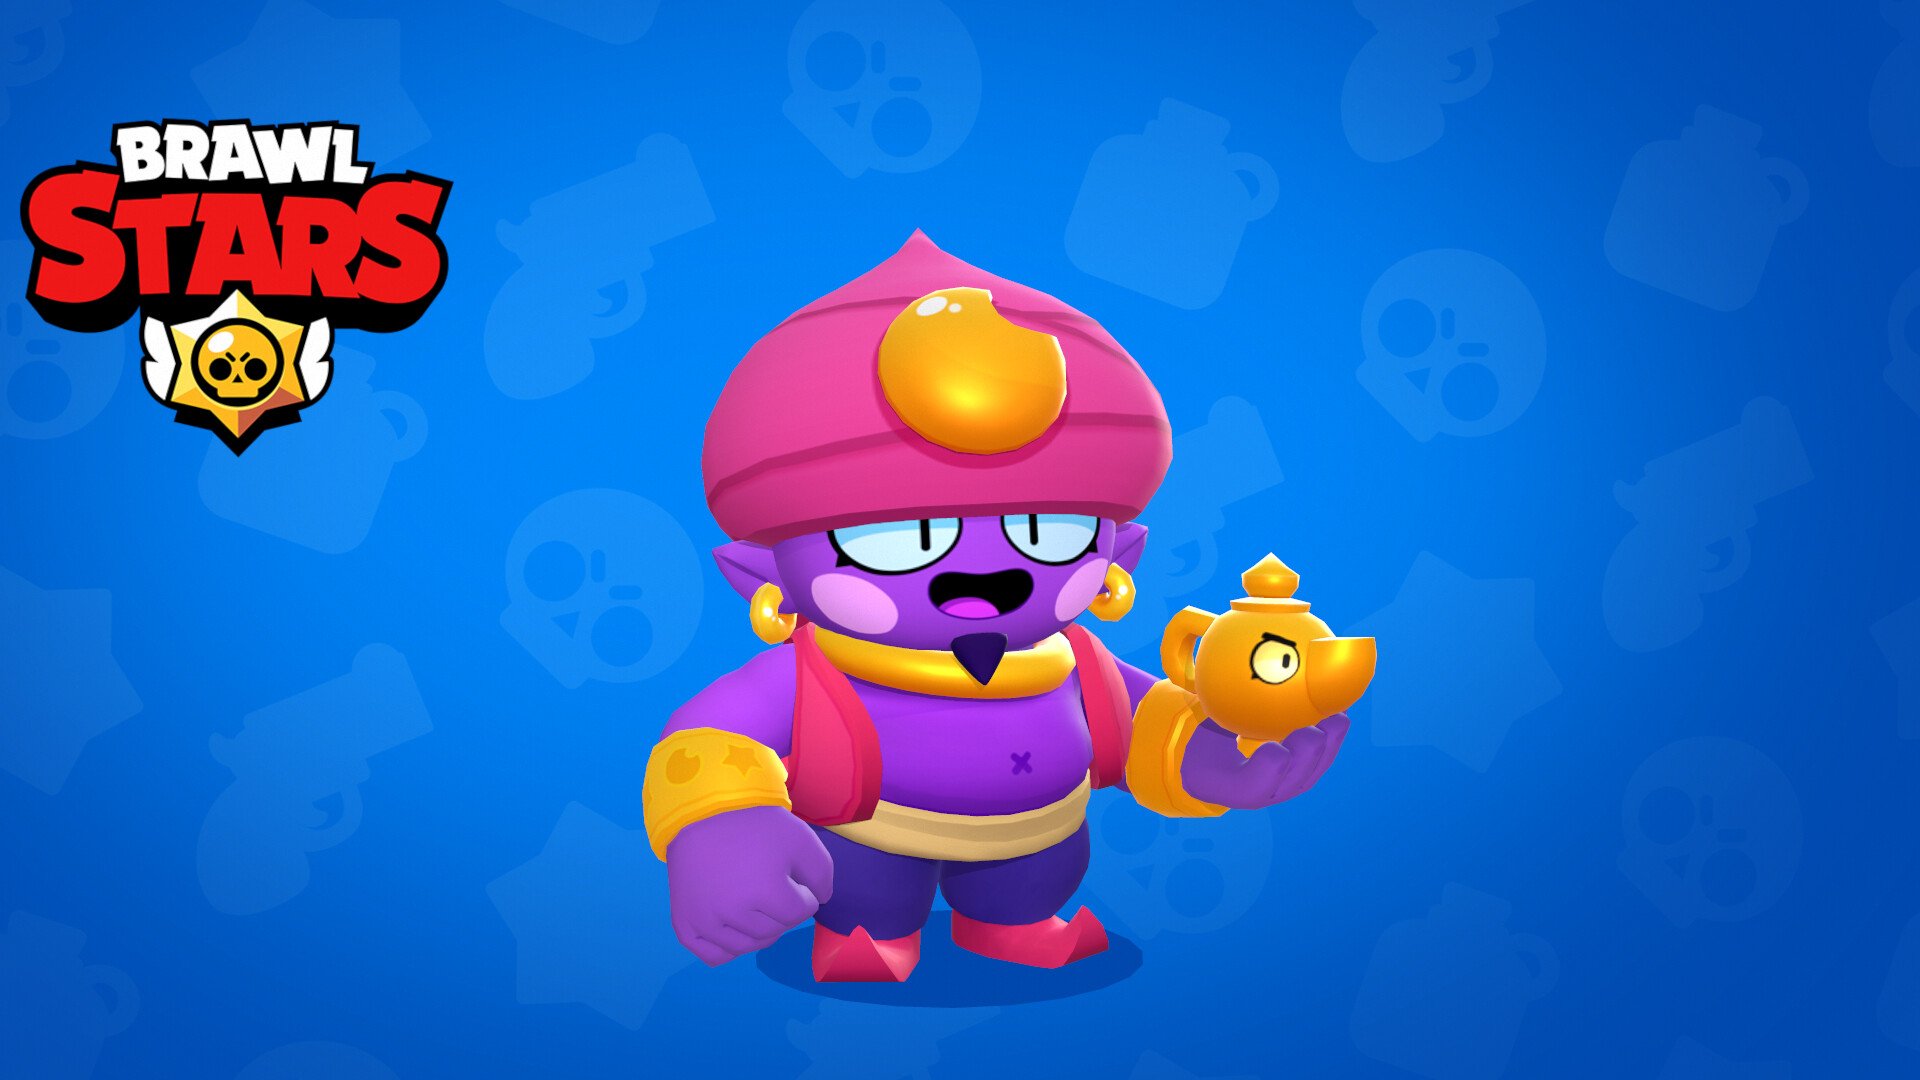 Supercell Team Brawlstars Is Looking For A Data Scientist As The Data Scientist In Brawl Stars We Expect You To Help Us Make The Game Even Better For Our Players